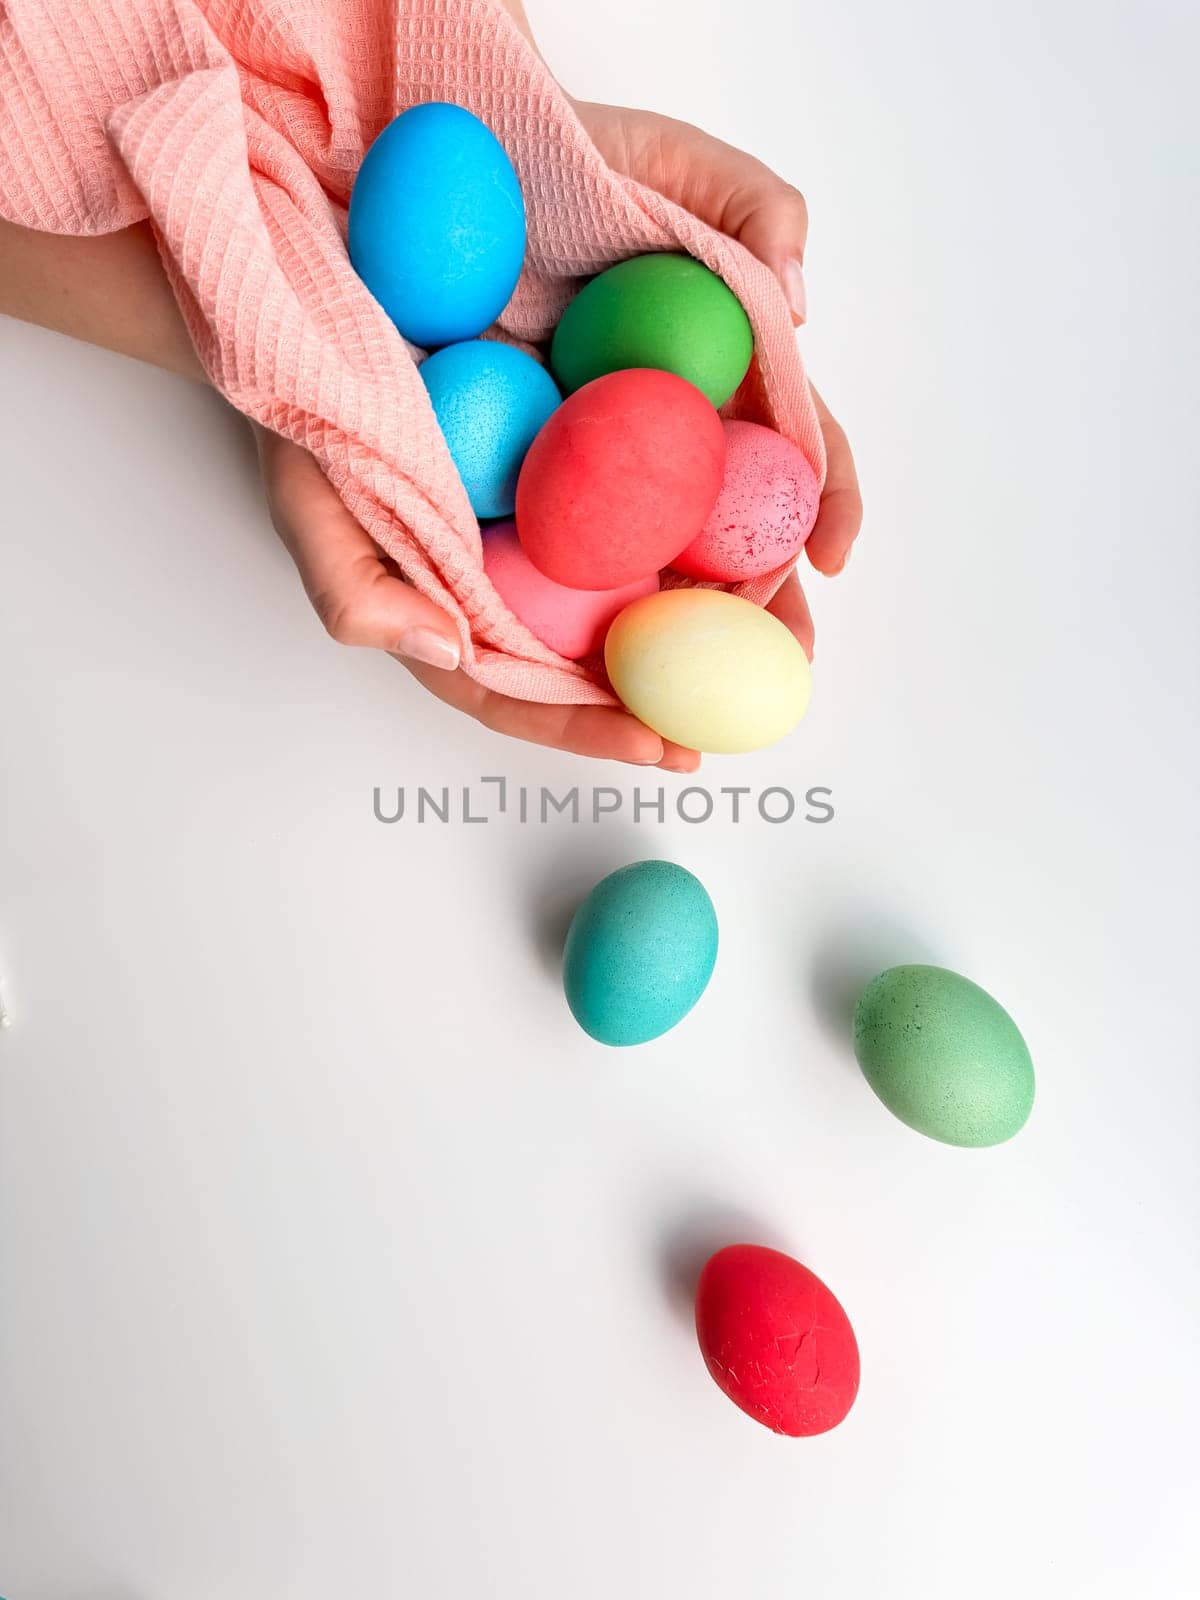 Hands cradling collection of brightly colored Easter eggs in pink fabric, evoking themes of Easter traditions, family fun, and springtime crafts. by Lunnica